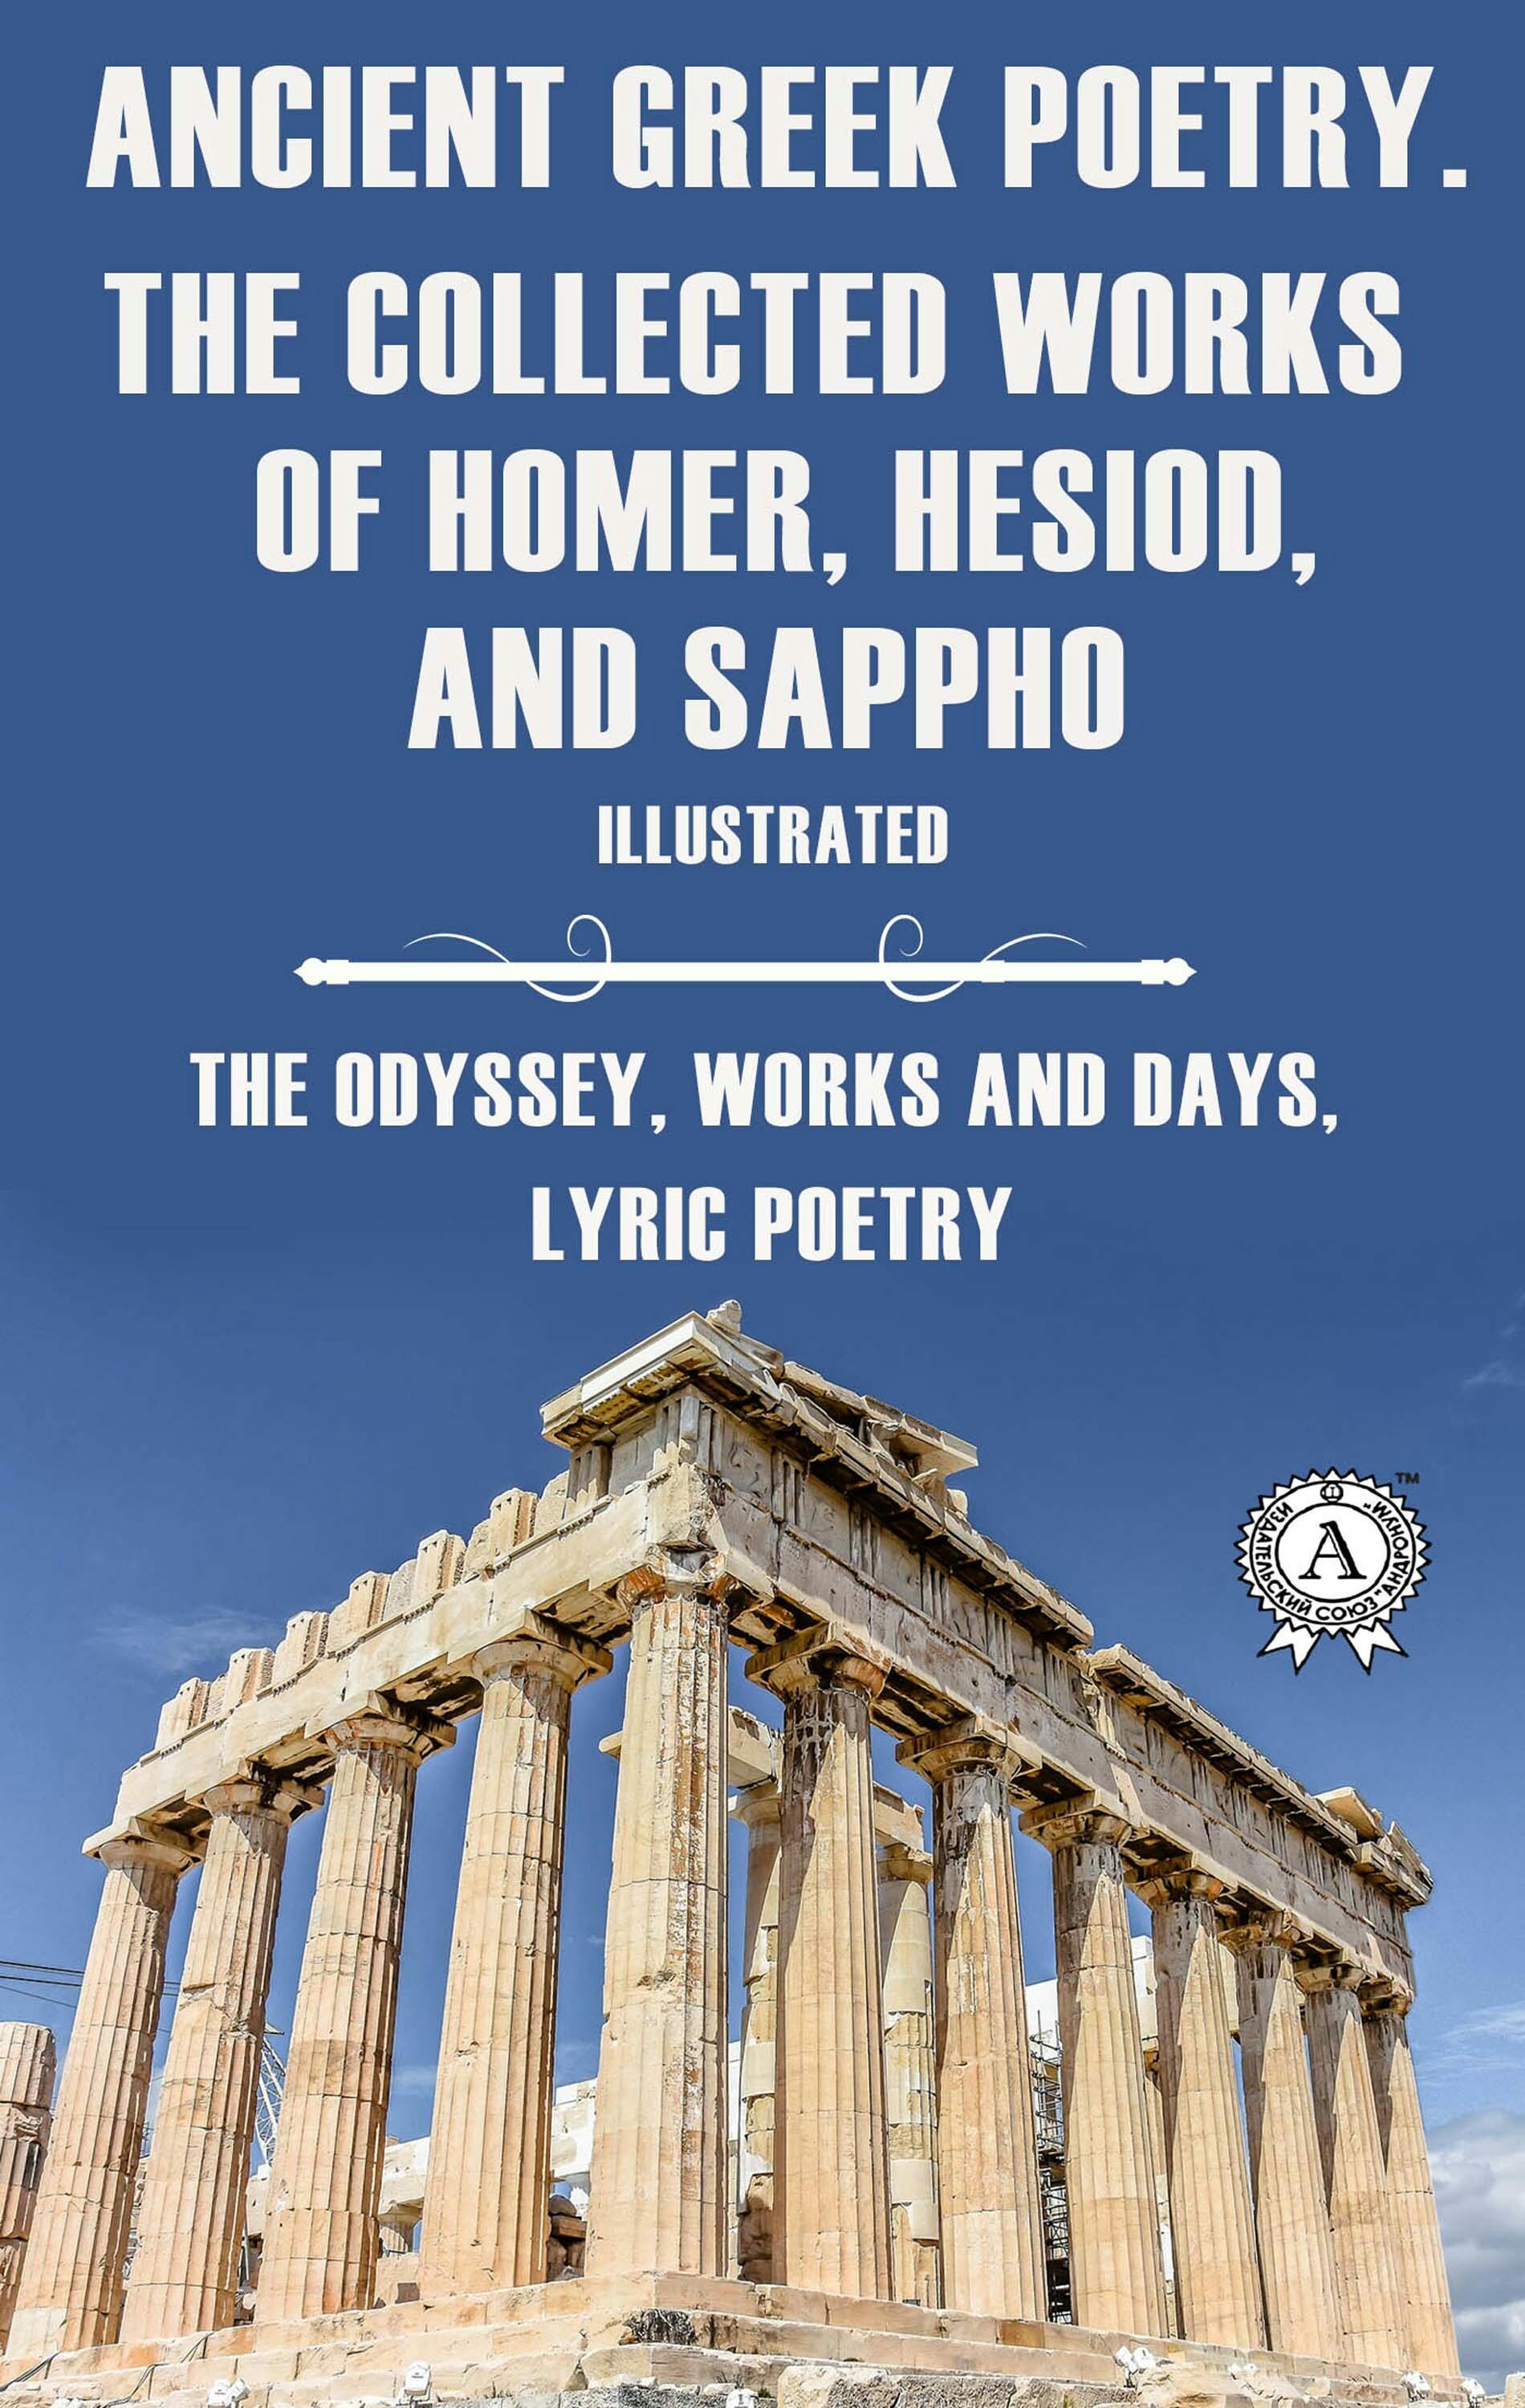 Ancient Greek poetry. The Collected Works of Homer, Hesiod and Sappho (Illustrated): The Odyssey, Works and Days, Lyric Poetry - undefined